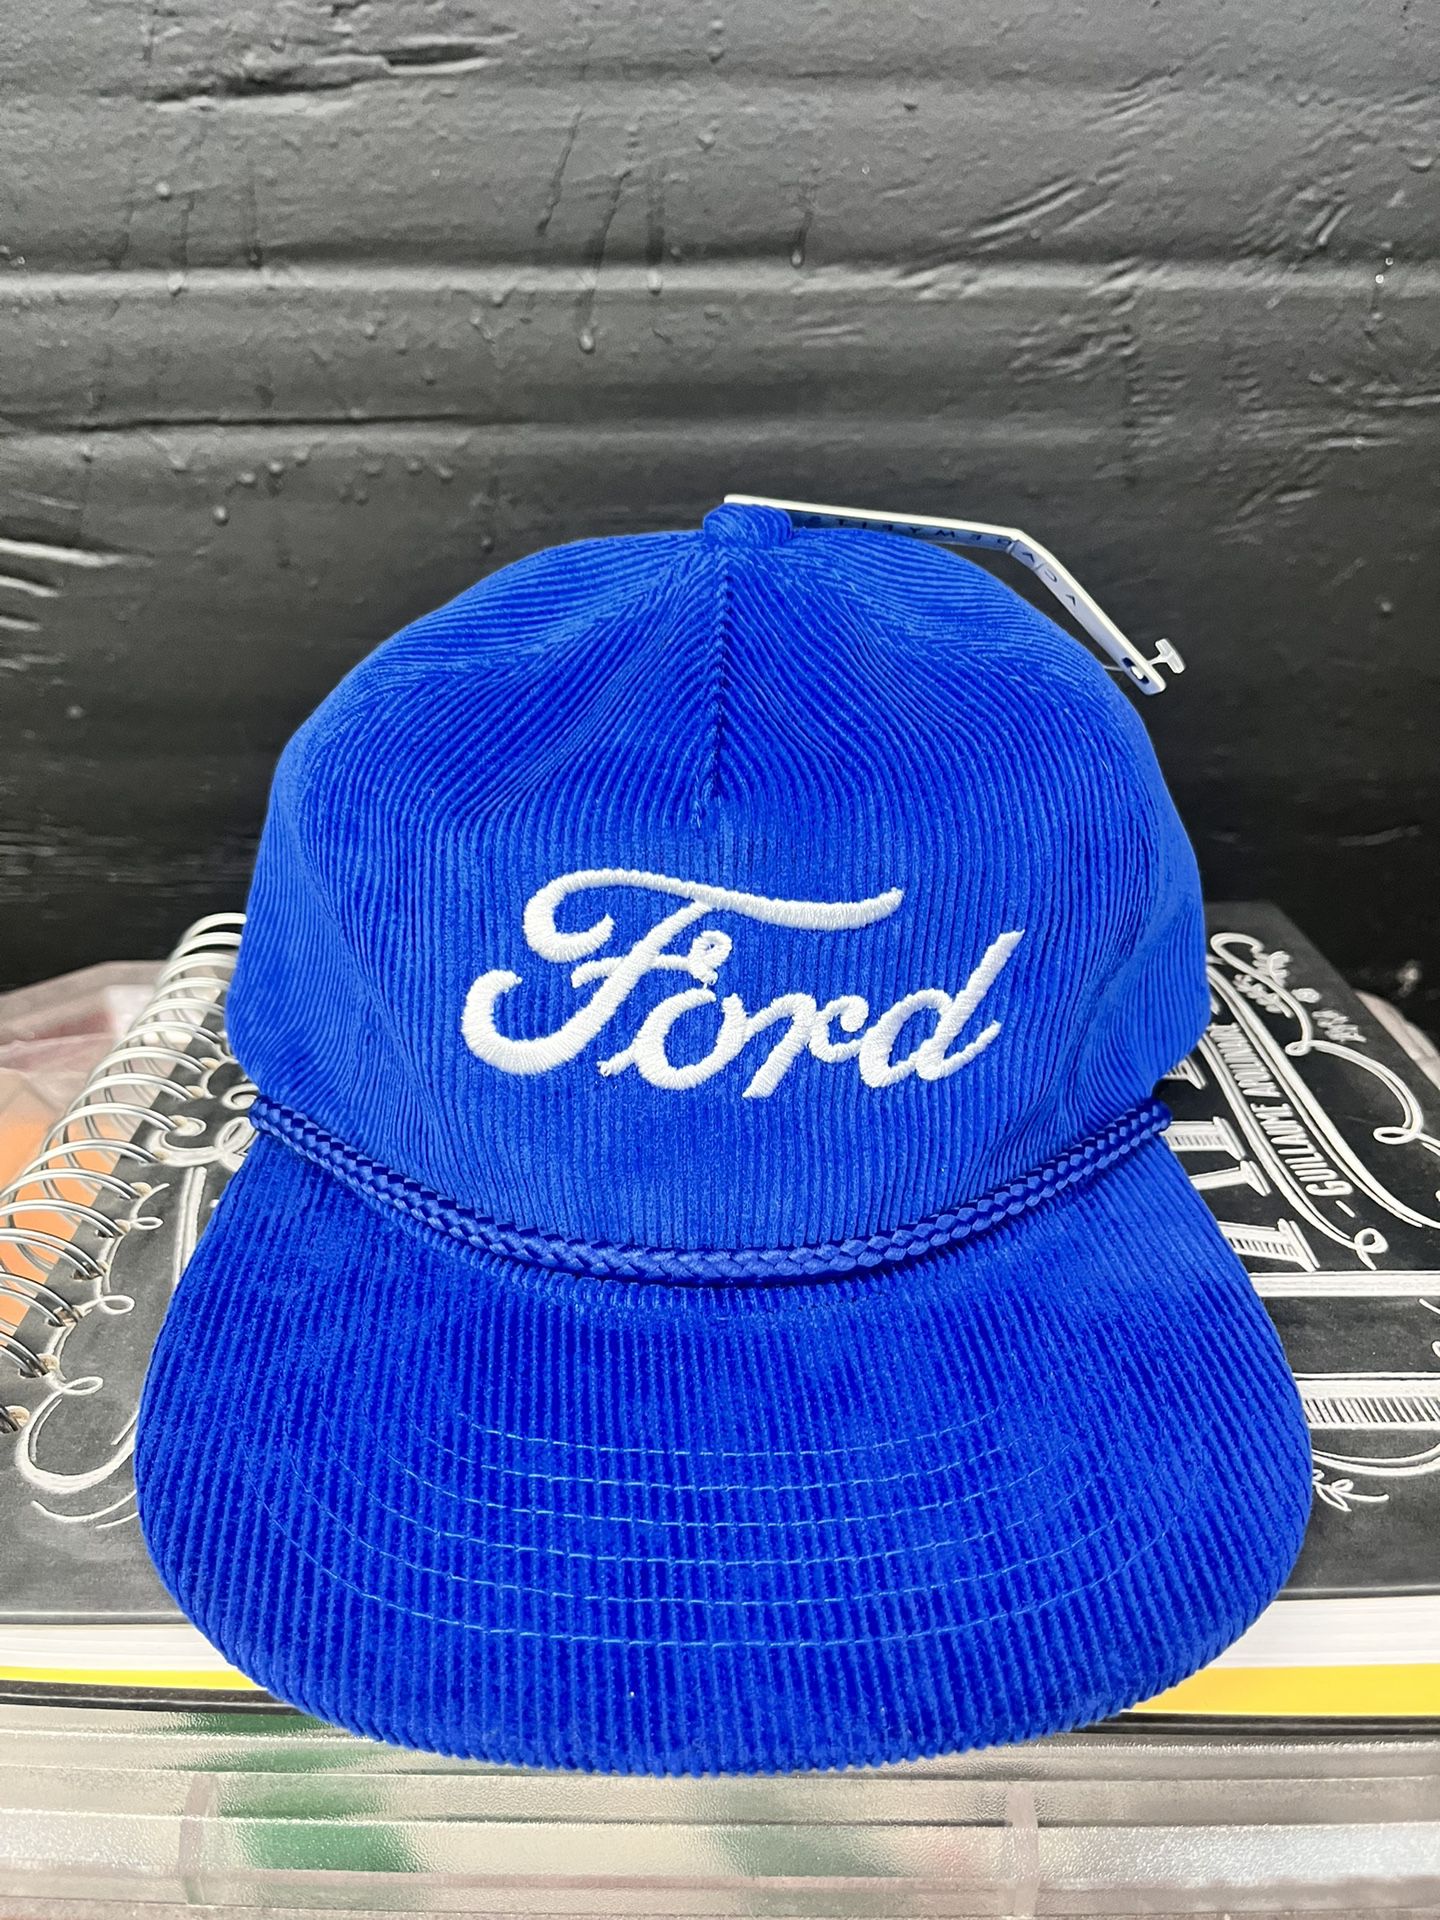 Brand New Embroidered Corduroy “Ford” Logo Text SnapBack